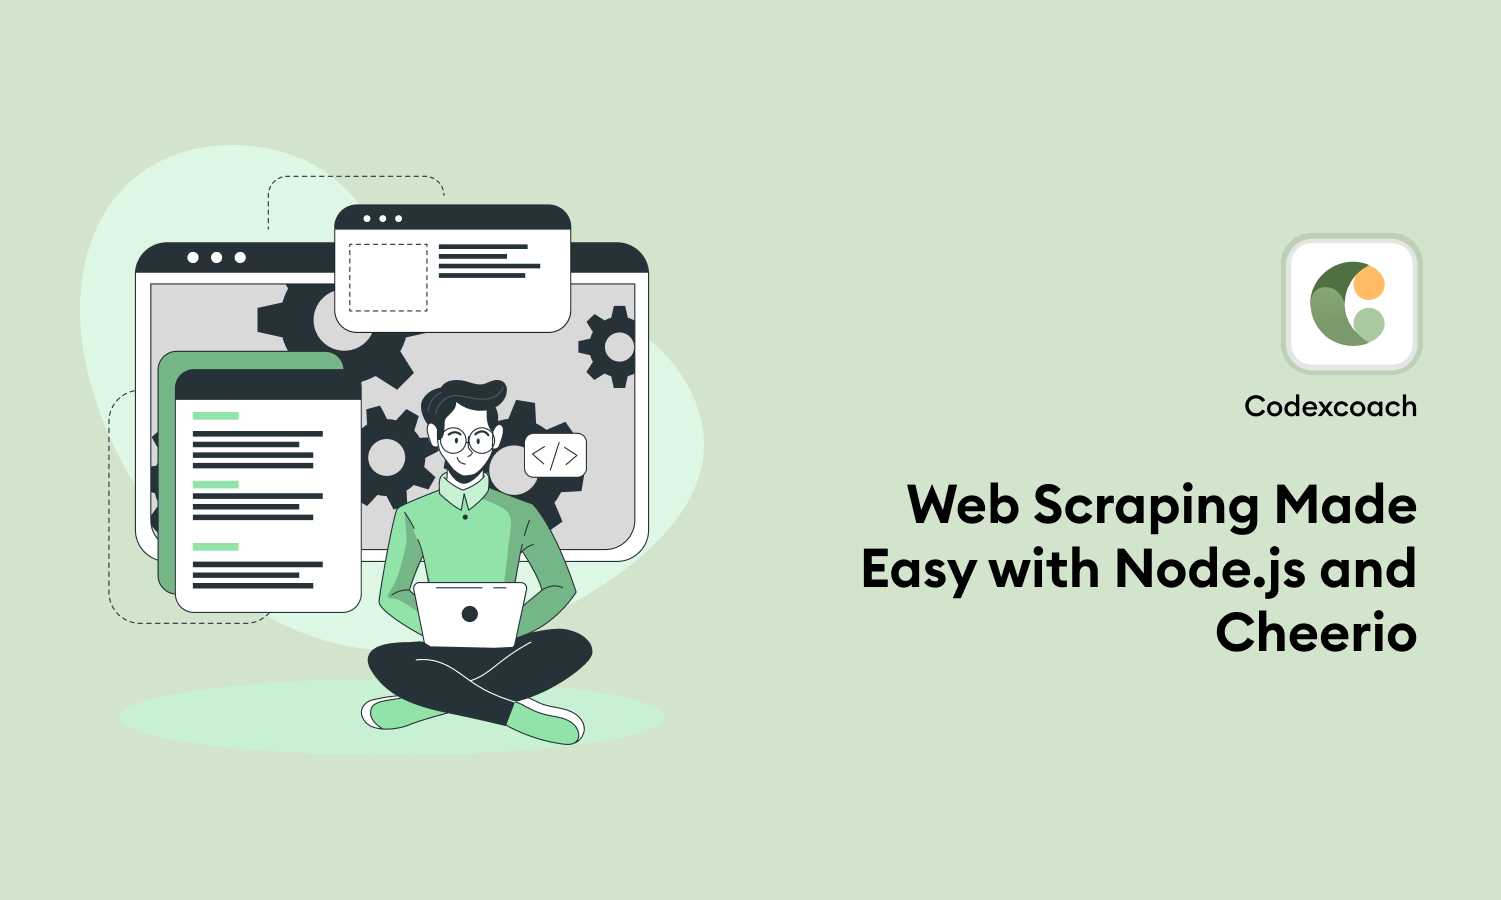 Web Scraping Made Easy with Node.js and Cheerio